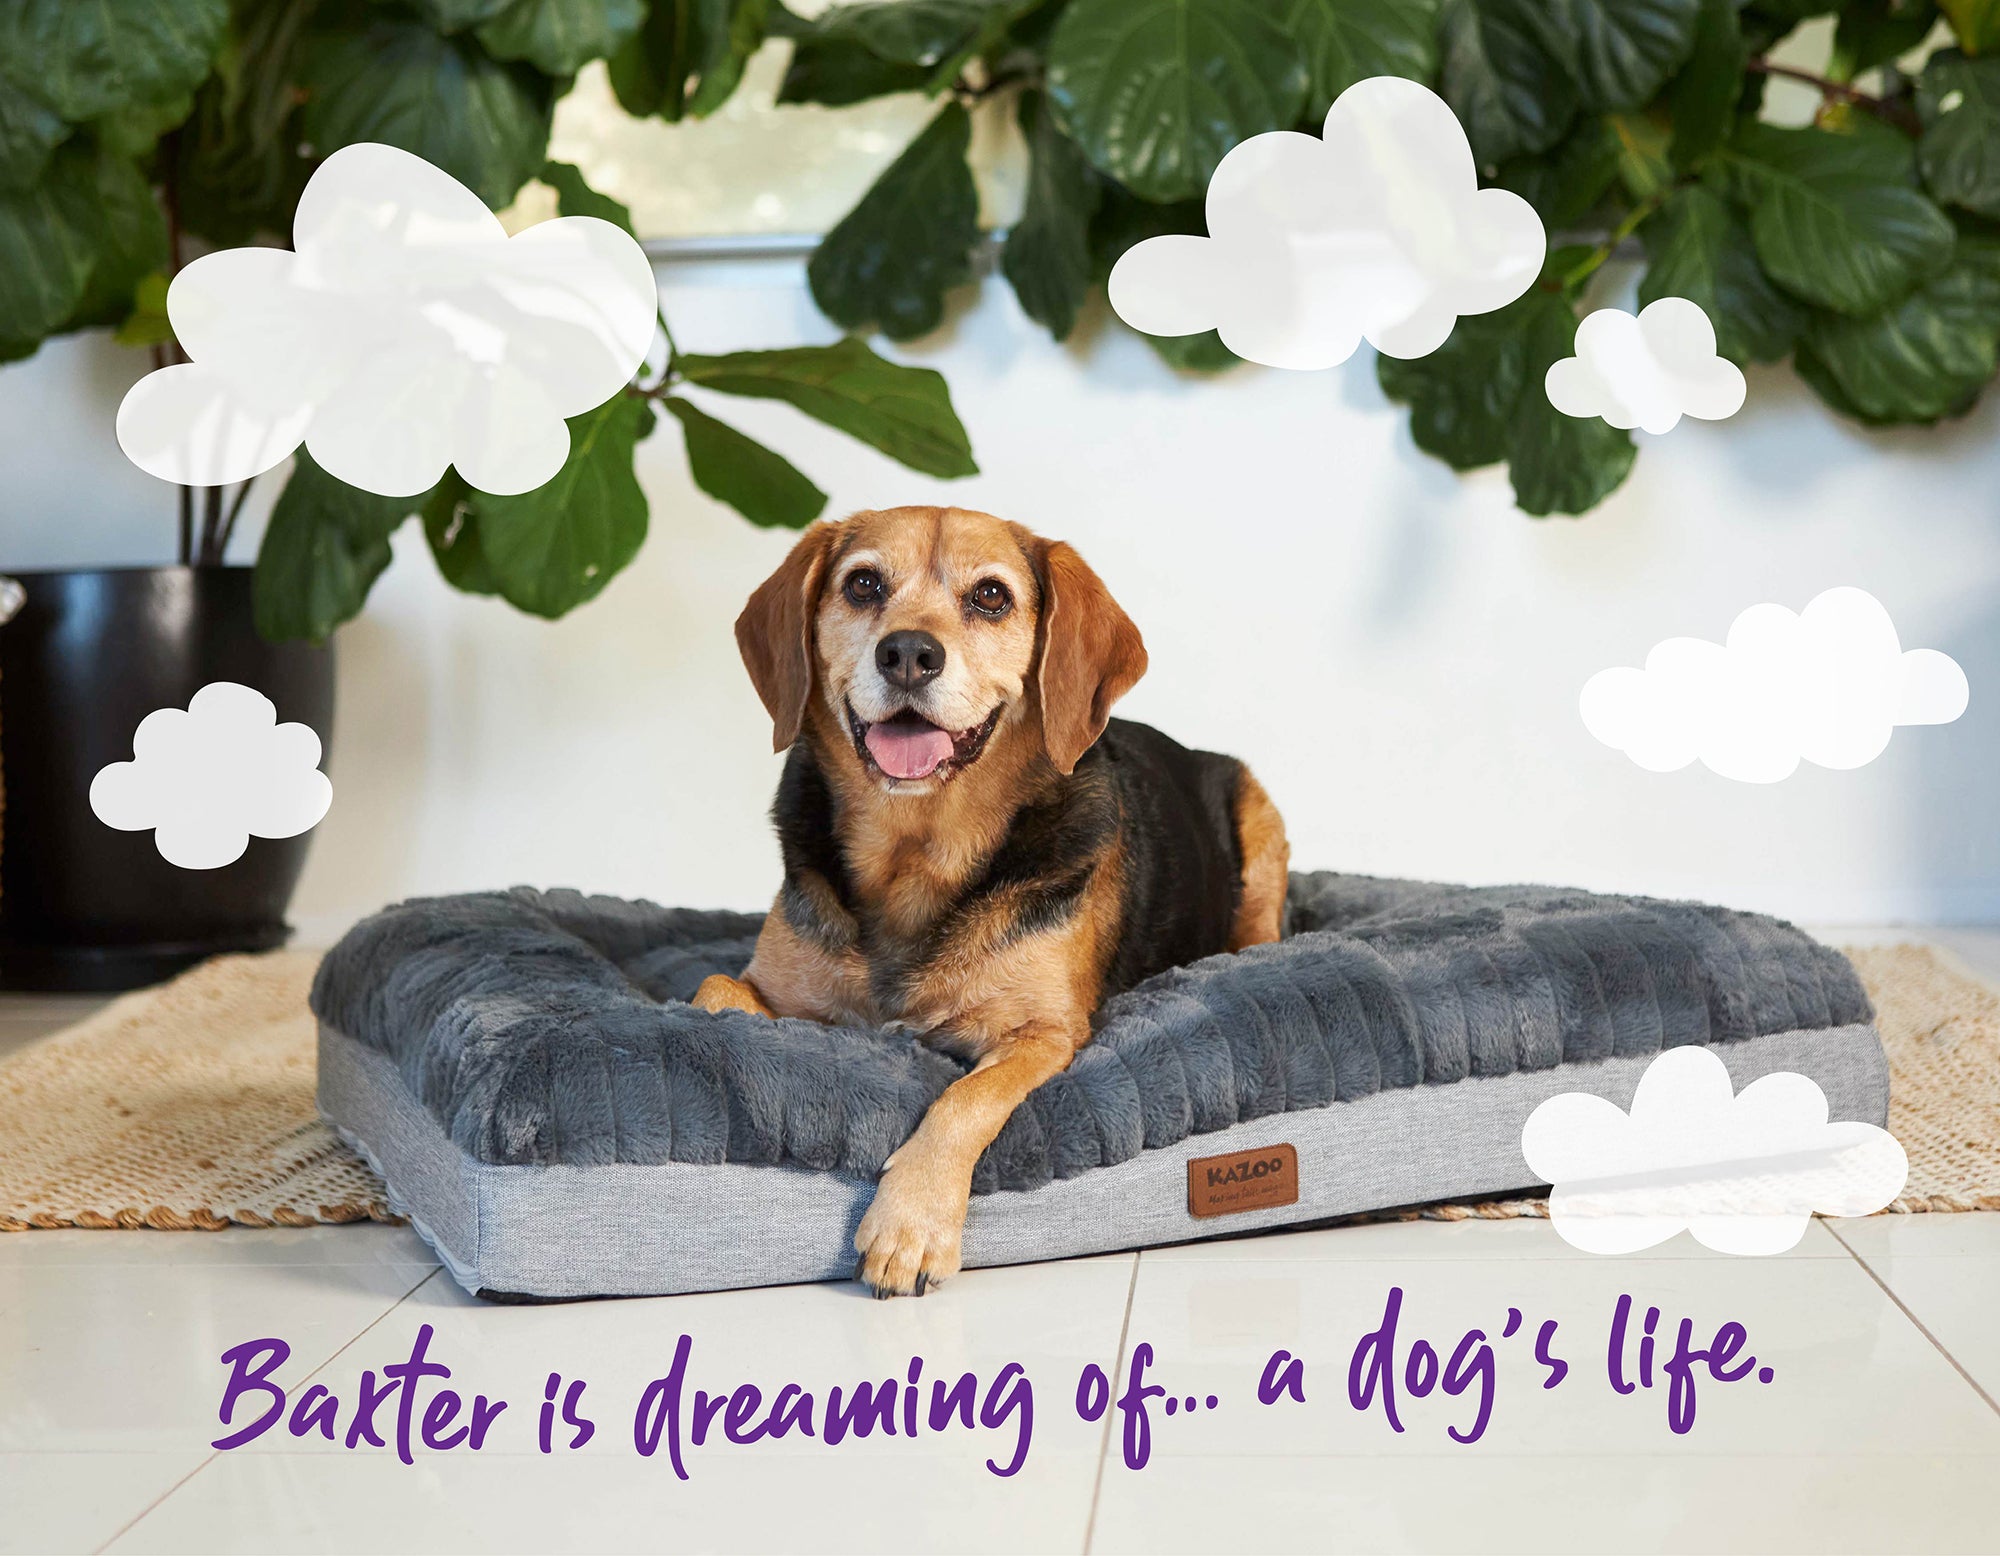 Baxter the dog very happy on his comfy fluffy bed with clouds around him